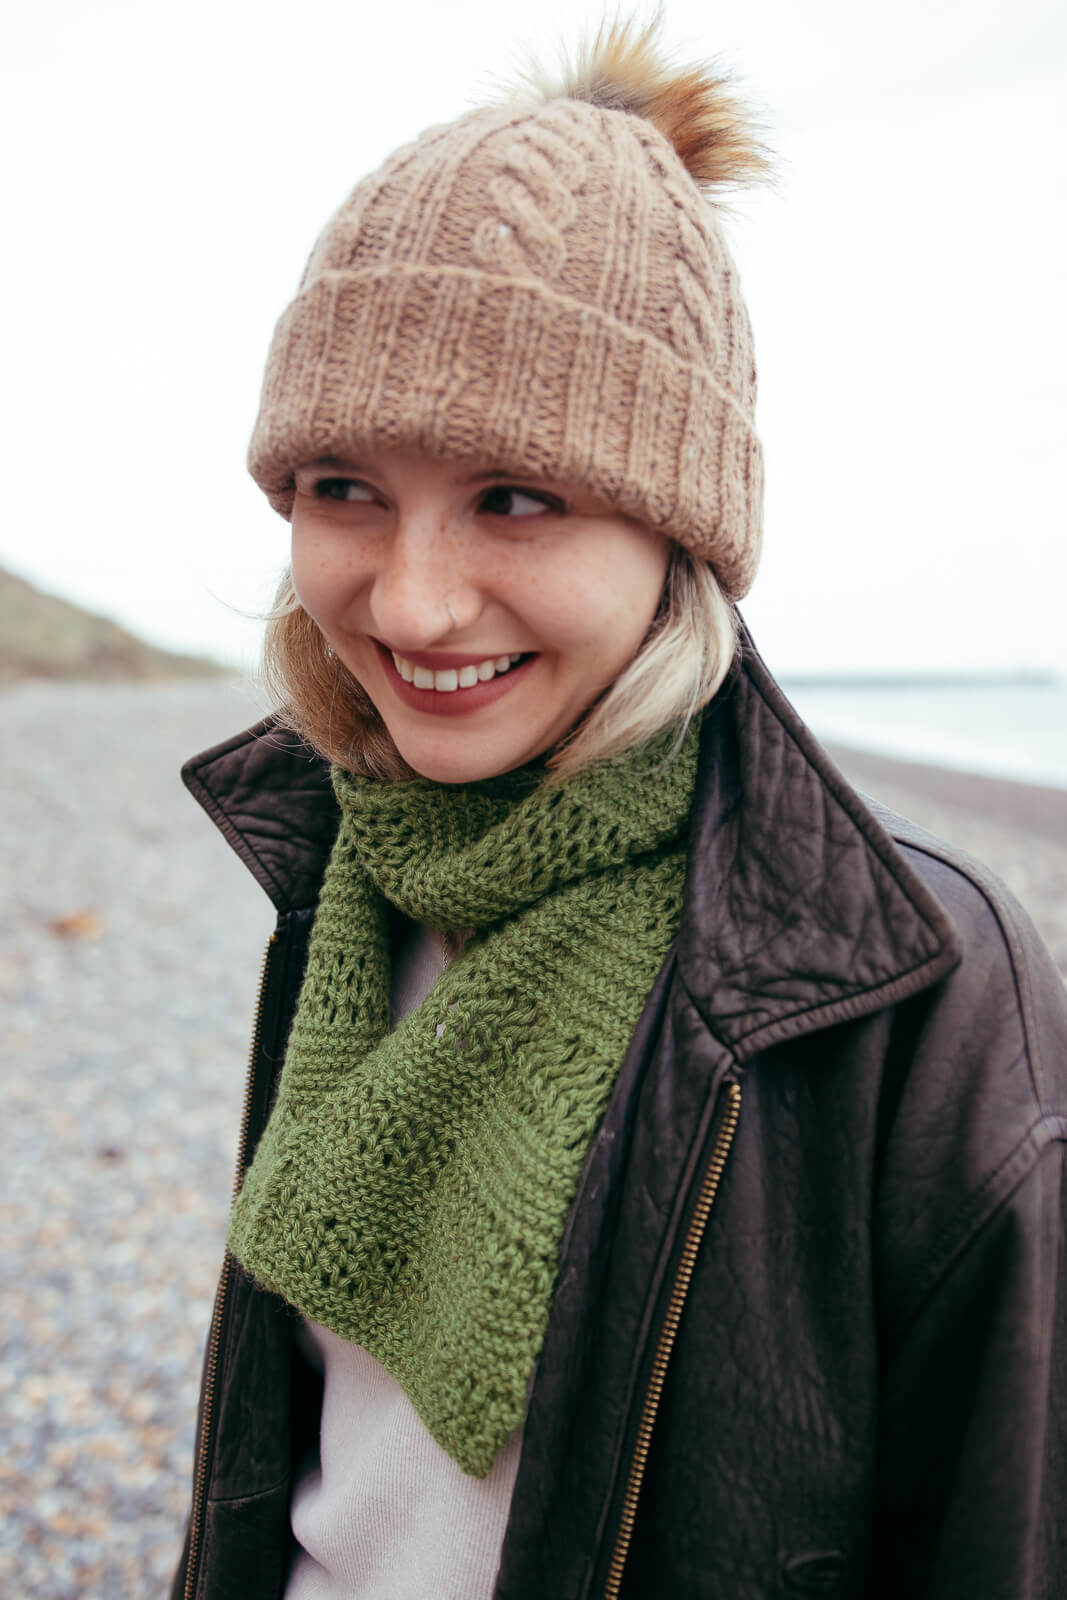 This alpaca wool cable hat knitting kit uses alpaca yarn from British and Irish farms. Shown here in Sandstone.